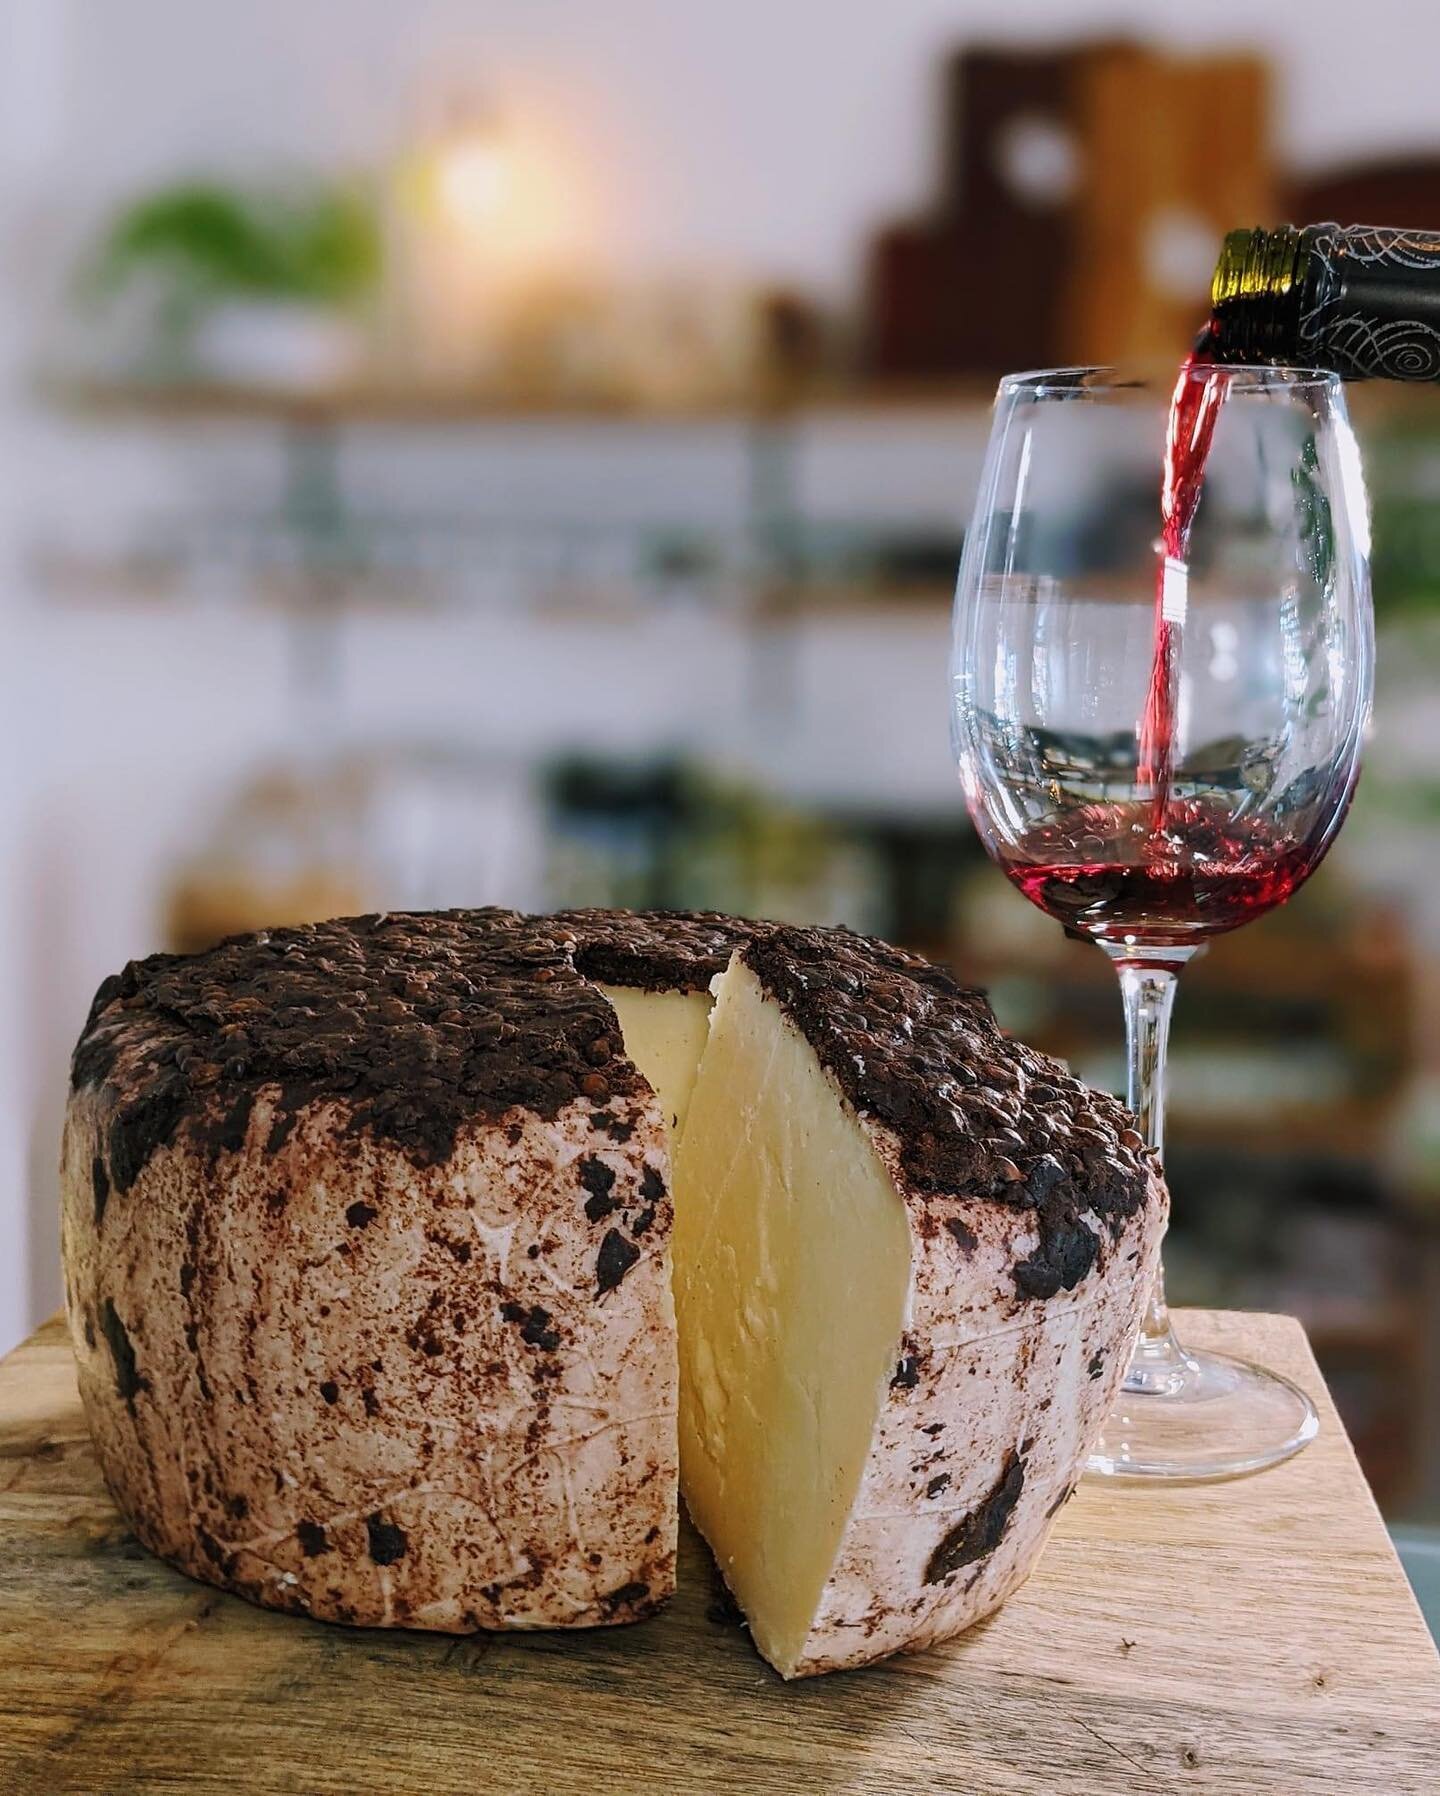 Formaggio Vacca Ubriaco (drunken cheese) is born from the centuries-old custom of hiding the cheese in grape must in order to keep it from the raids of the war. 🍇 Produced in the alpine foothills of Italy, this semi firm cow&rsquo;s milk cheese is s